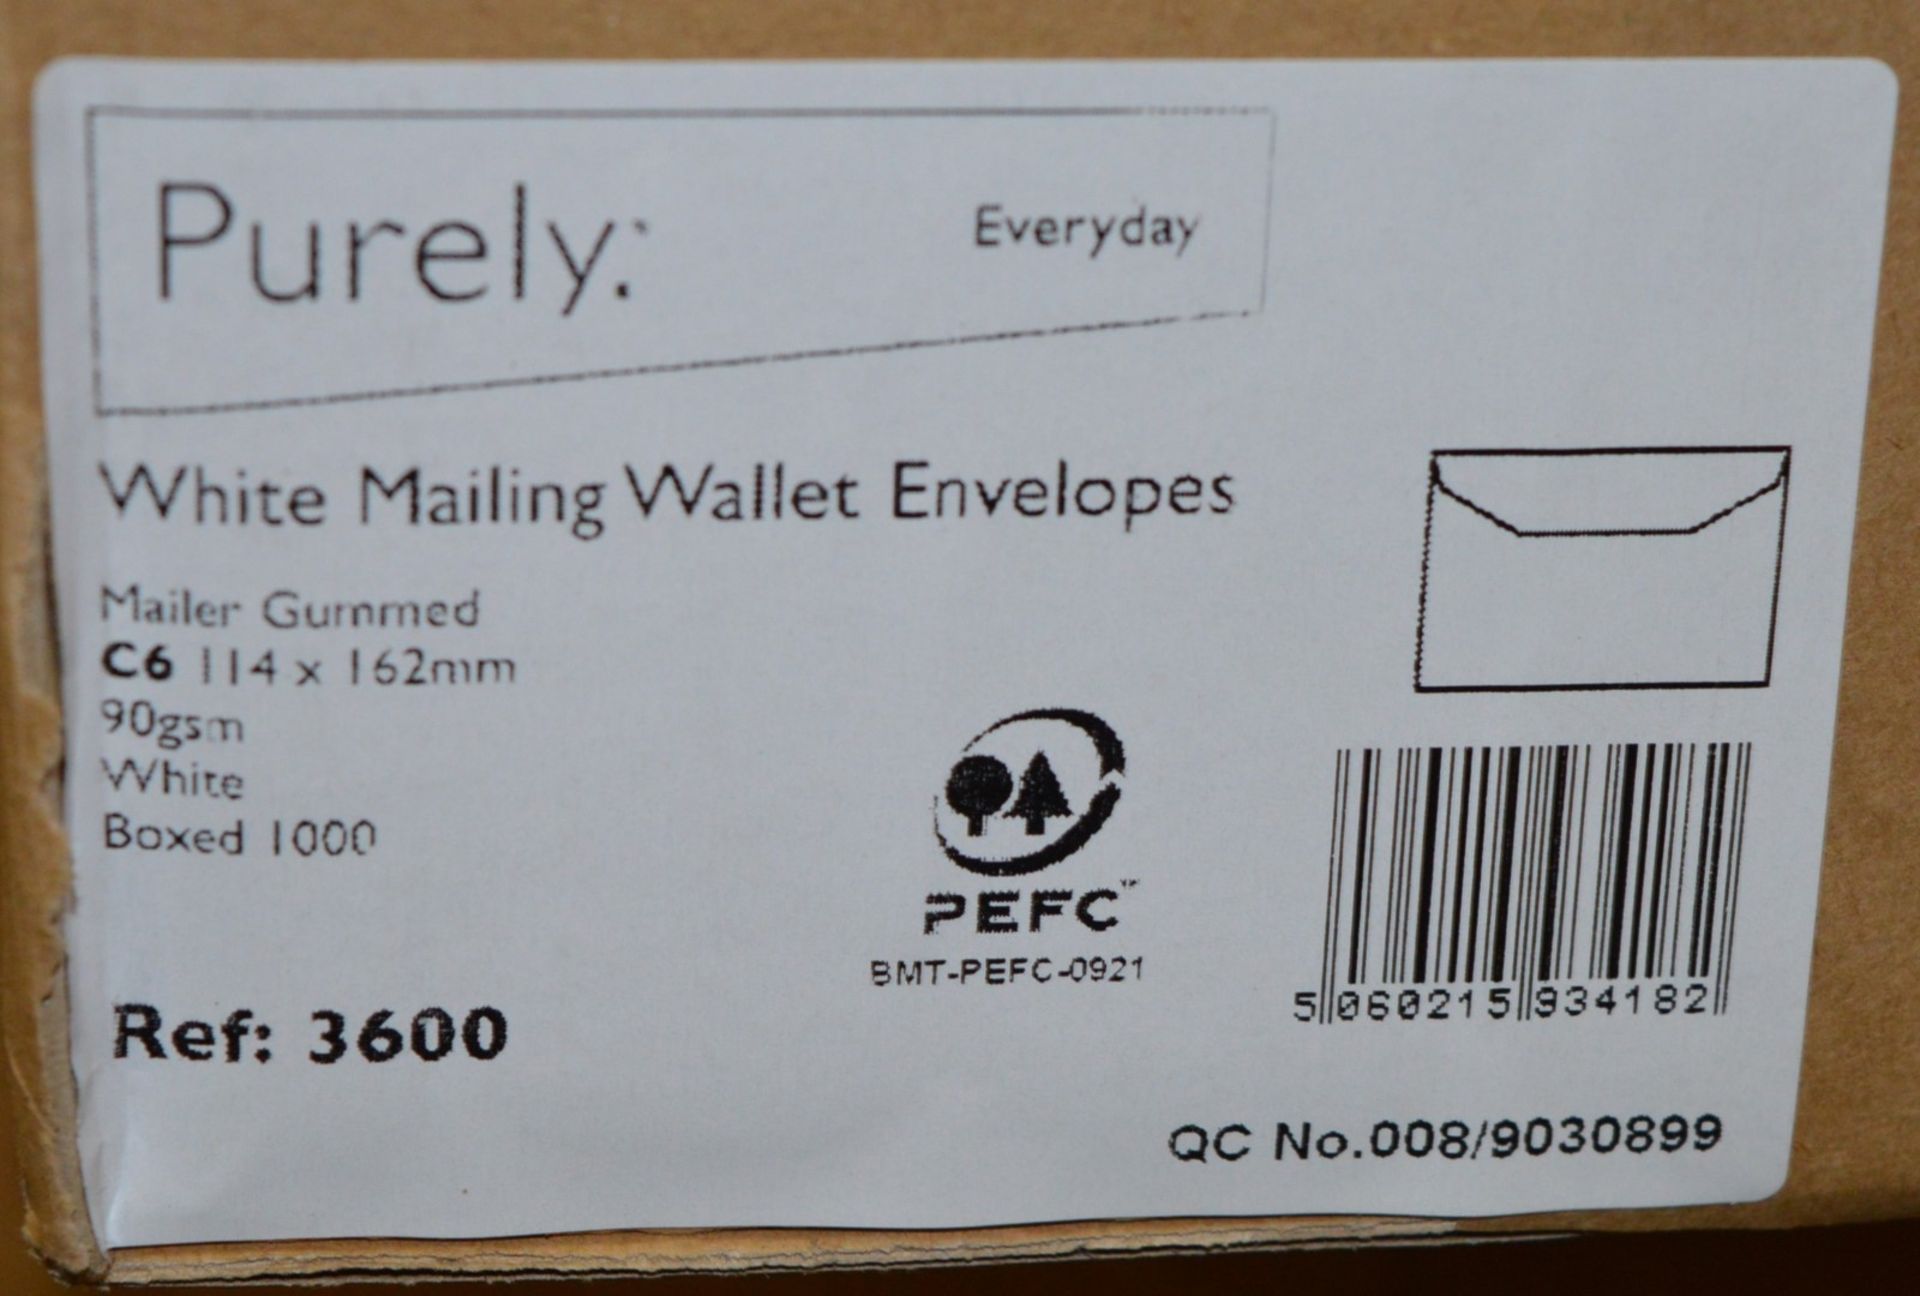 5,000 x Everyday Purely White Mailing Wallet Envelopes - C6 114x162mm 90gsm White - Includes 5 x - Image 3 of 3